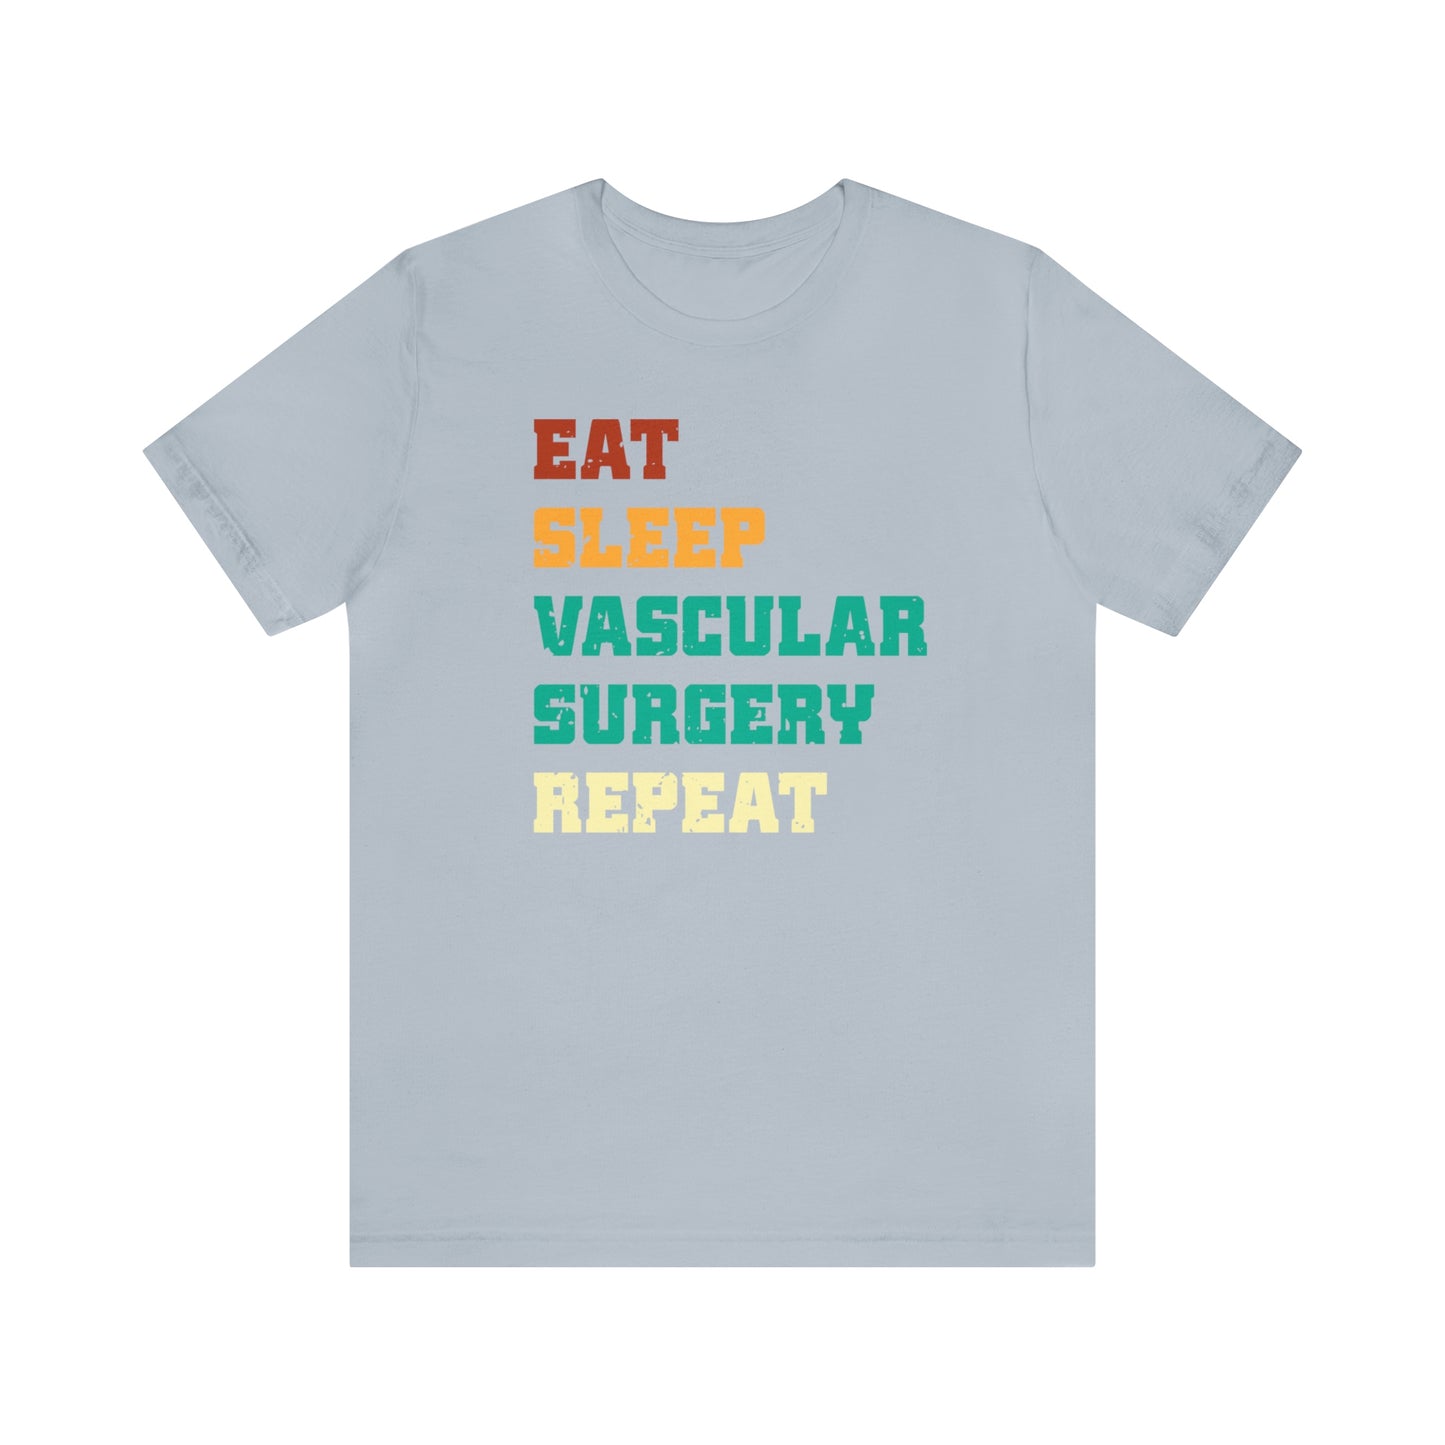 Eat Sleep Vascular Surgery Repeat, Unisex T-shirt, Mothers Day, Fathers Day, Doctor, Surgeon, Surgical Team Gift